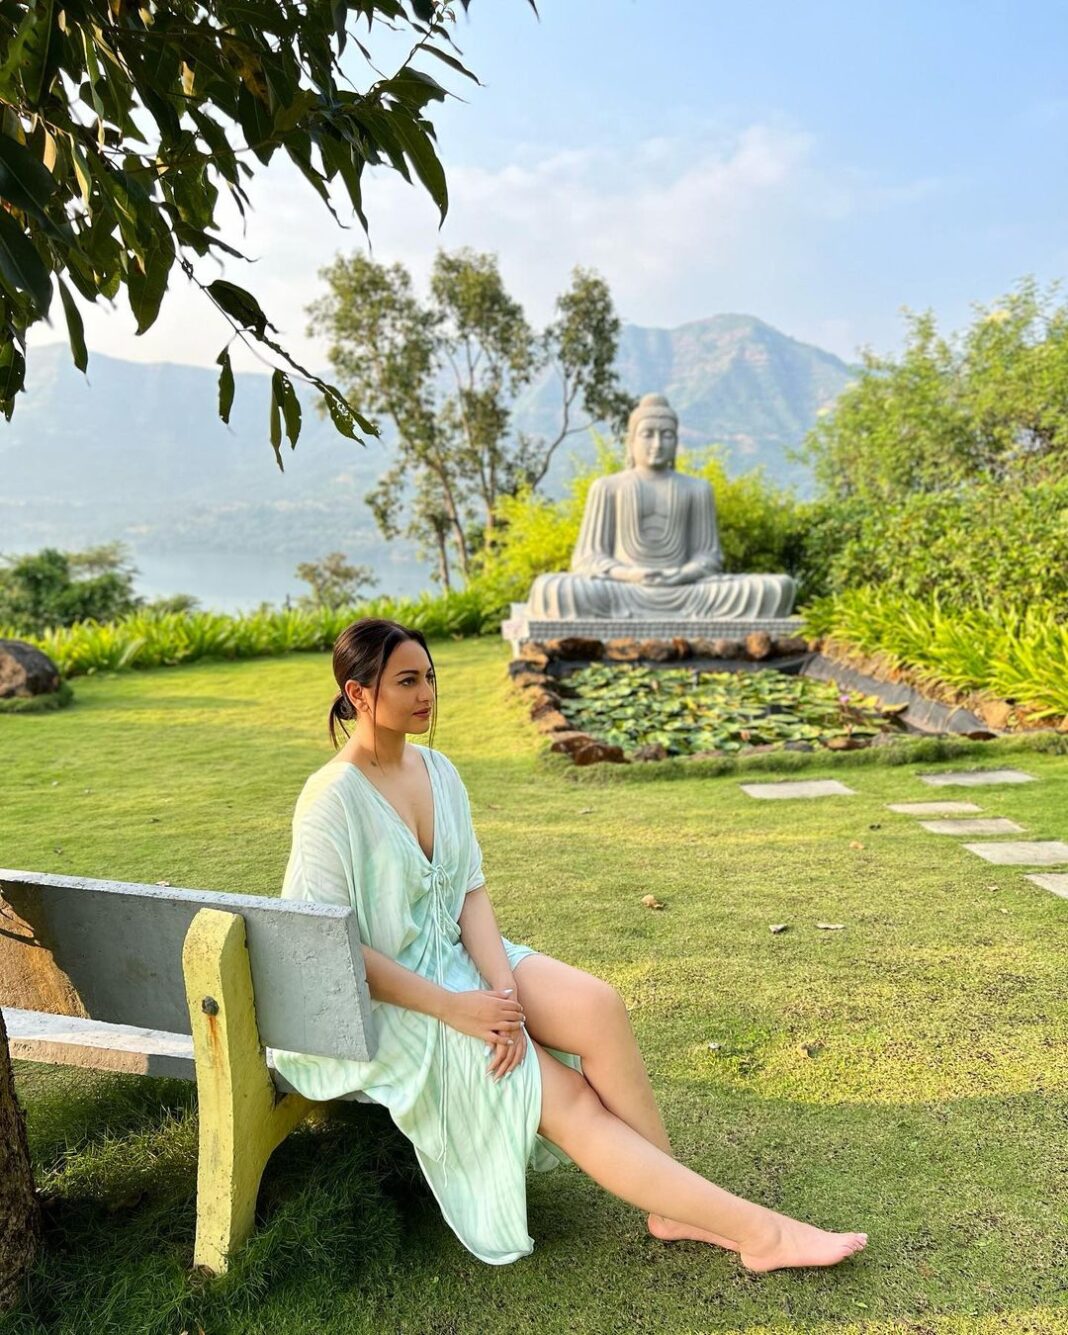 Sonakshi Sinha Instagram - Gautam Buddha said “Stop trying to calm the storm… calm yourself the storm will pass” so here i am finding some peace and calm at @atmantan 💙 With detox partner and photographer @sanamratansi 😂